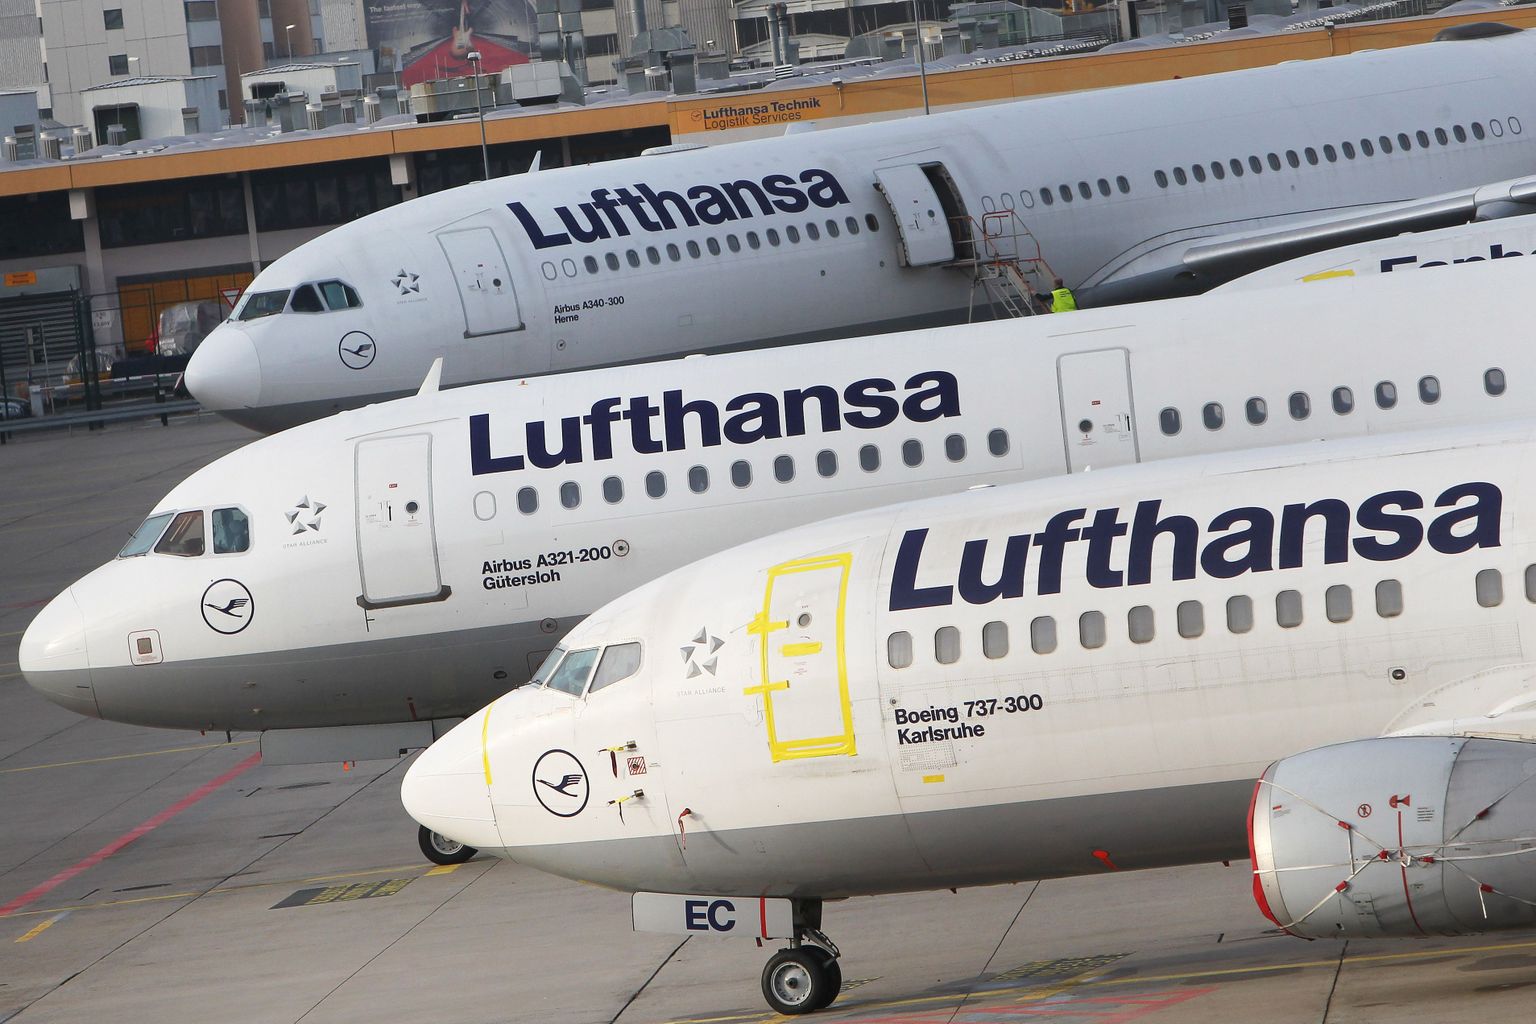 Parked aircrafts of german carrier Lufthansa stand on a tarmac due to a pilots' strike at the airport in Frankfurt am Main, on November 23, 2016.
Germany's flagship carrier Lufthansa cancelled nearly 900 flights Wednesday because of a strike by pilots, causing travel disruption for tens of thousands of passengers in the latest escalation of a long-simmering pay dispute. / AFP PHOTO / DANIEL ROLAND